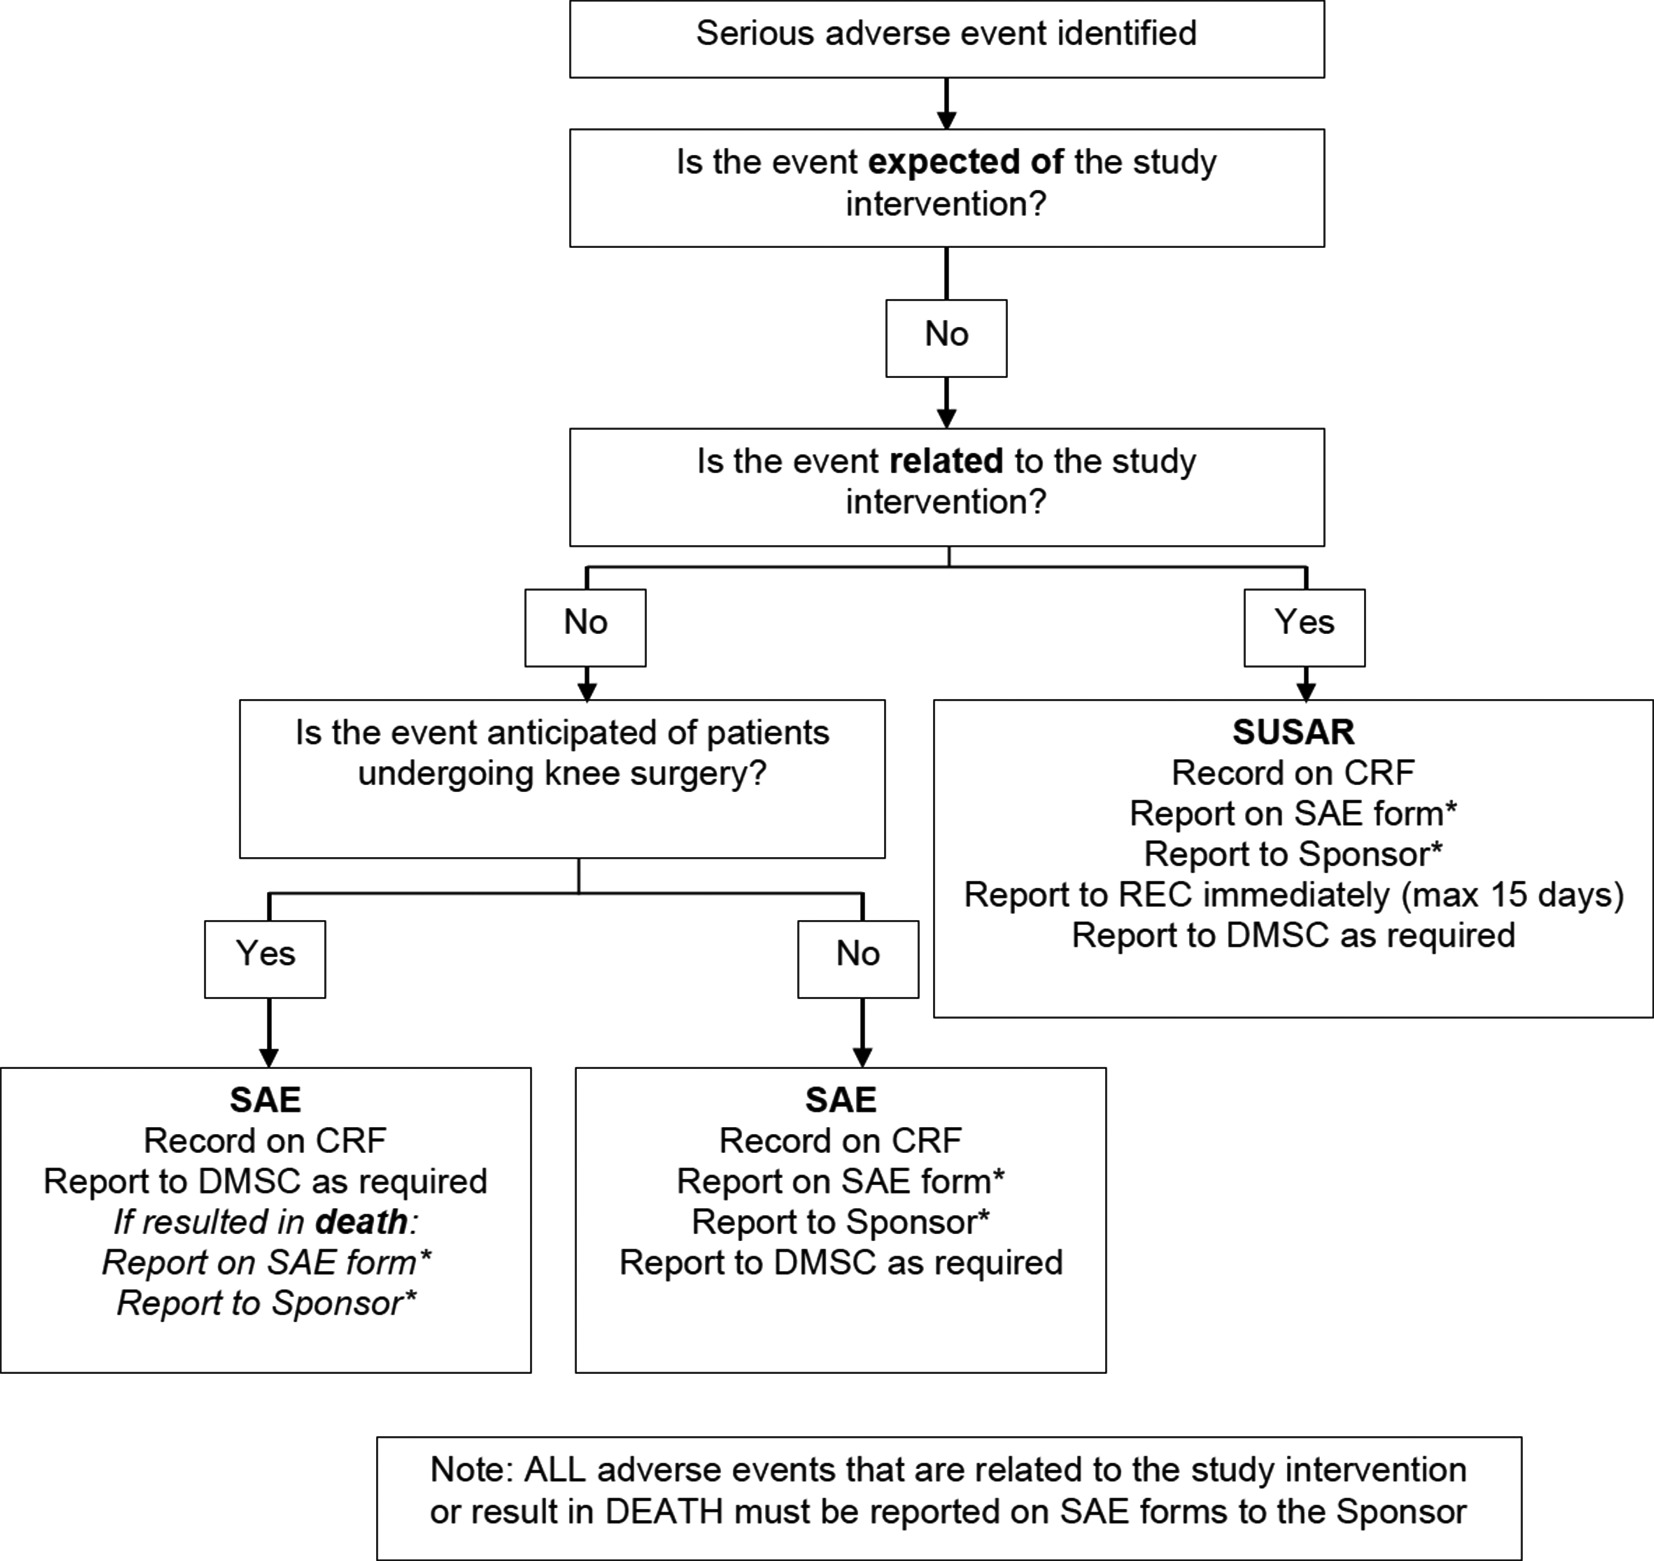 Fig. 2 
          Serious adverse event (SAE) reporting flowchart. *SAEs will be subject to expedited reporting to the sponsor up to three months post-randomization, unless the SAE is related. Related SAEs will be subject to expedited reporting to the sponsor up to 12 months post-randomization. Beyond the three-month timepoint, aggregated reports will be provided to the sponsor. CRF, case report form; DMSC, data monitoring and safety committee; REC, Research Ethics Committee; SUSAR, suspected unexpected serious adverse reactions.
        